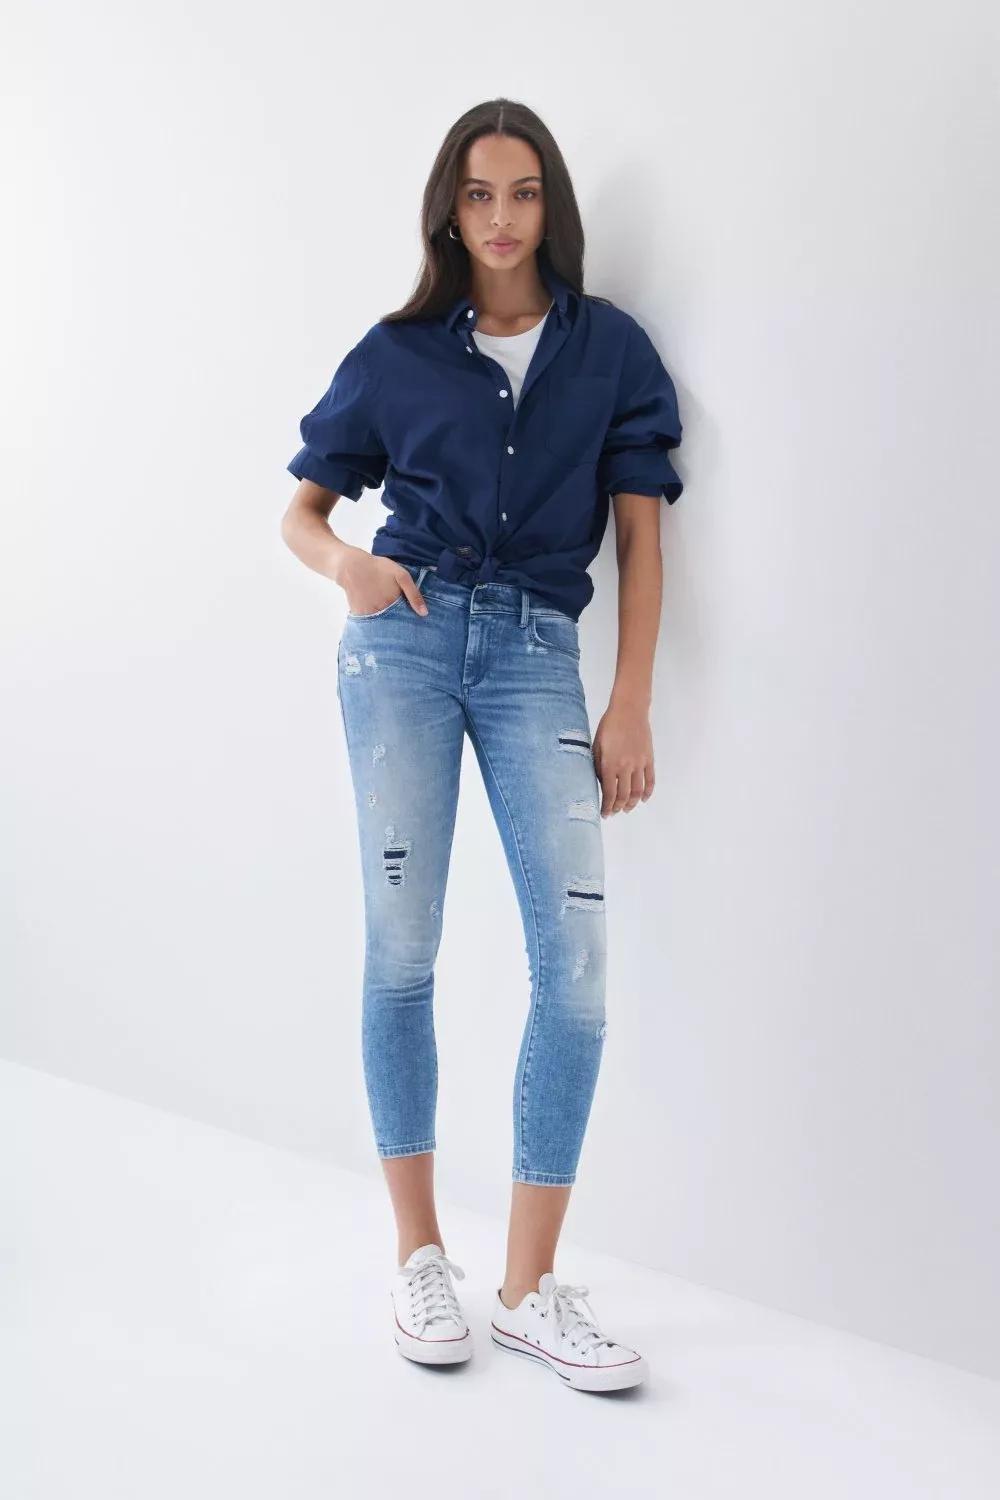 Salsa Jeans - Skinny Push Up Wonder jeans with detail on the pockets